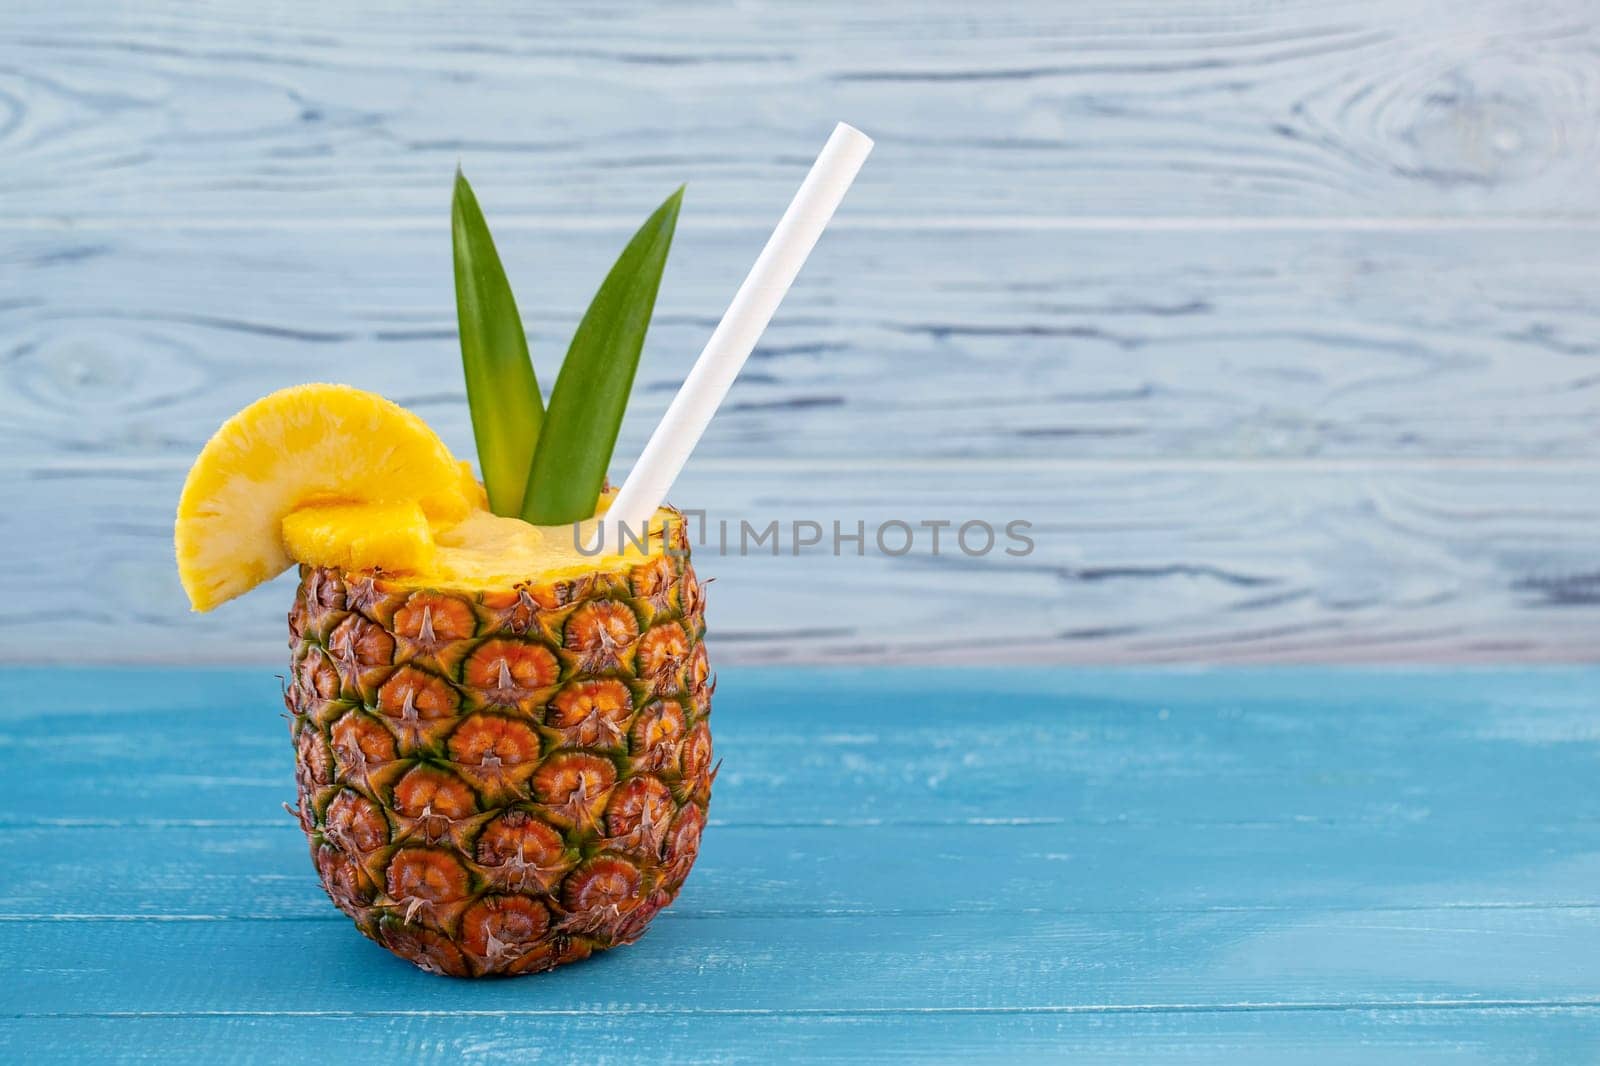 A horizontal photo featuring a pina colada cocktail served in a hollowed-out pineapple with pineapple wedges, a straw, and green leaves on a blue wooden background with copyspace on the right side of the frame